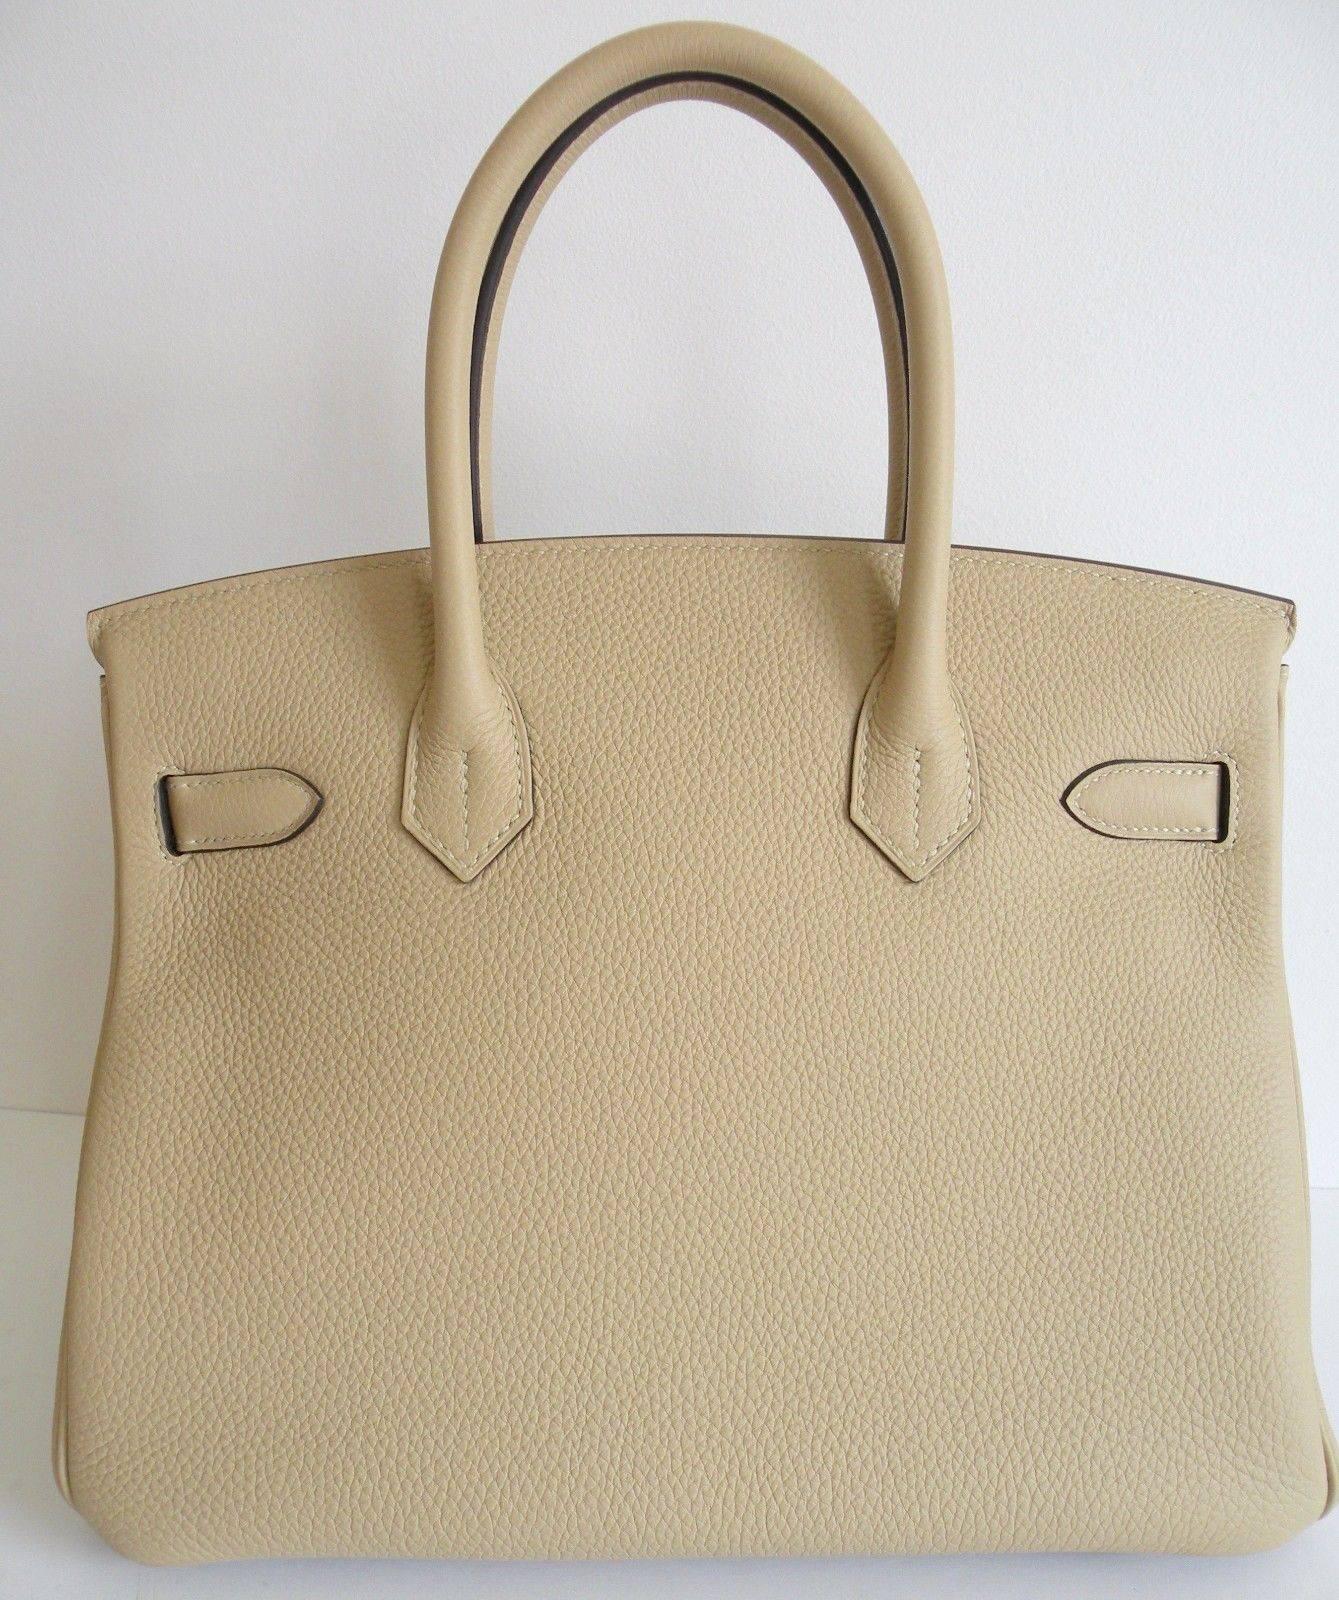 Beautiful New Color from Hermes called Trench.
The color is in the beige family.
This Birkin done in 30cm, has Palladium Hardware and is a fabulous new neutral from Hermes.
Goes with so many different colors, you cant go wrong with this great shade